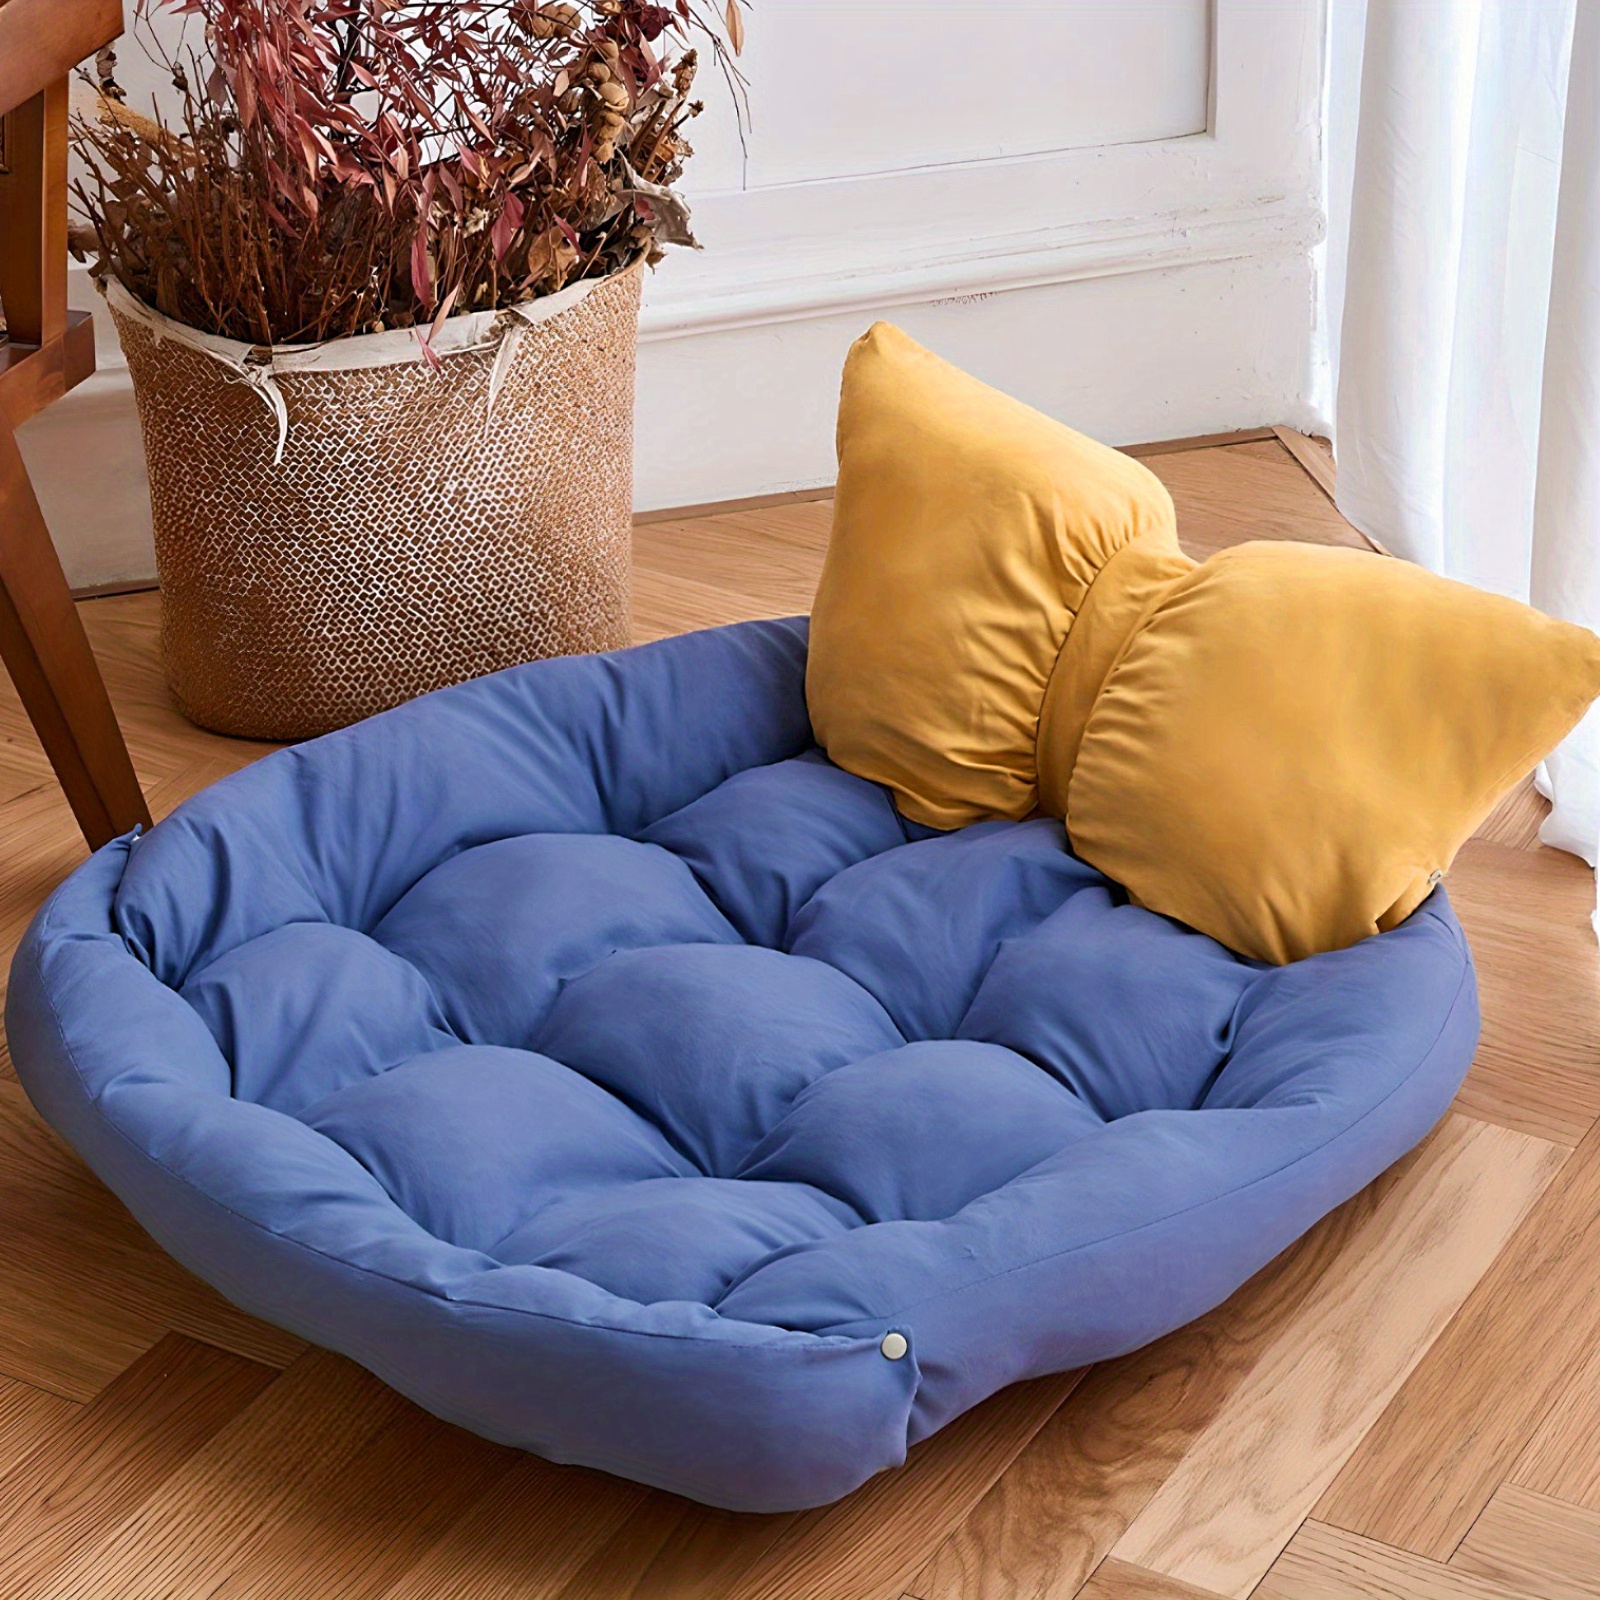 Dog Bed For Large Medium Small Dogs Cats Puppy Detachable Washable Pet Bed Pet Mat Dual Use Dog Sleeping Cushion Pad Soft Dog Beds Cushion Kennel Calming Dog Bed Cat Bed Pet Bed Bow Shape Blue Yellow Pink details 1